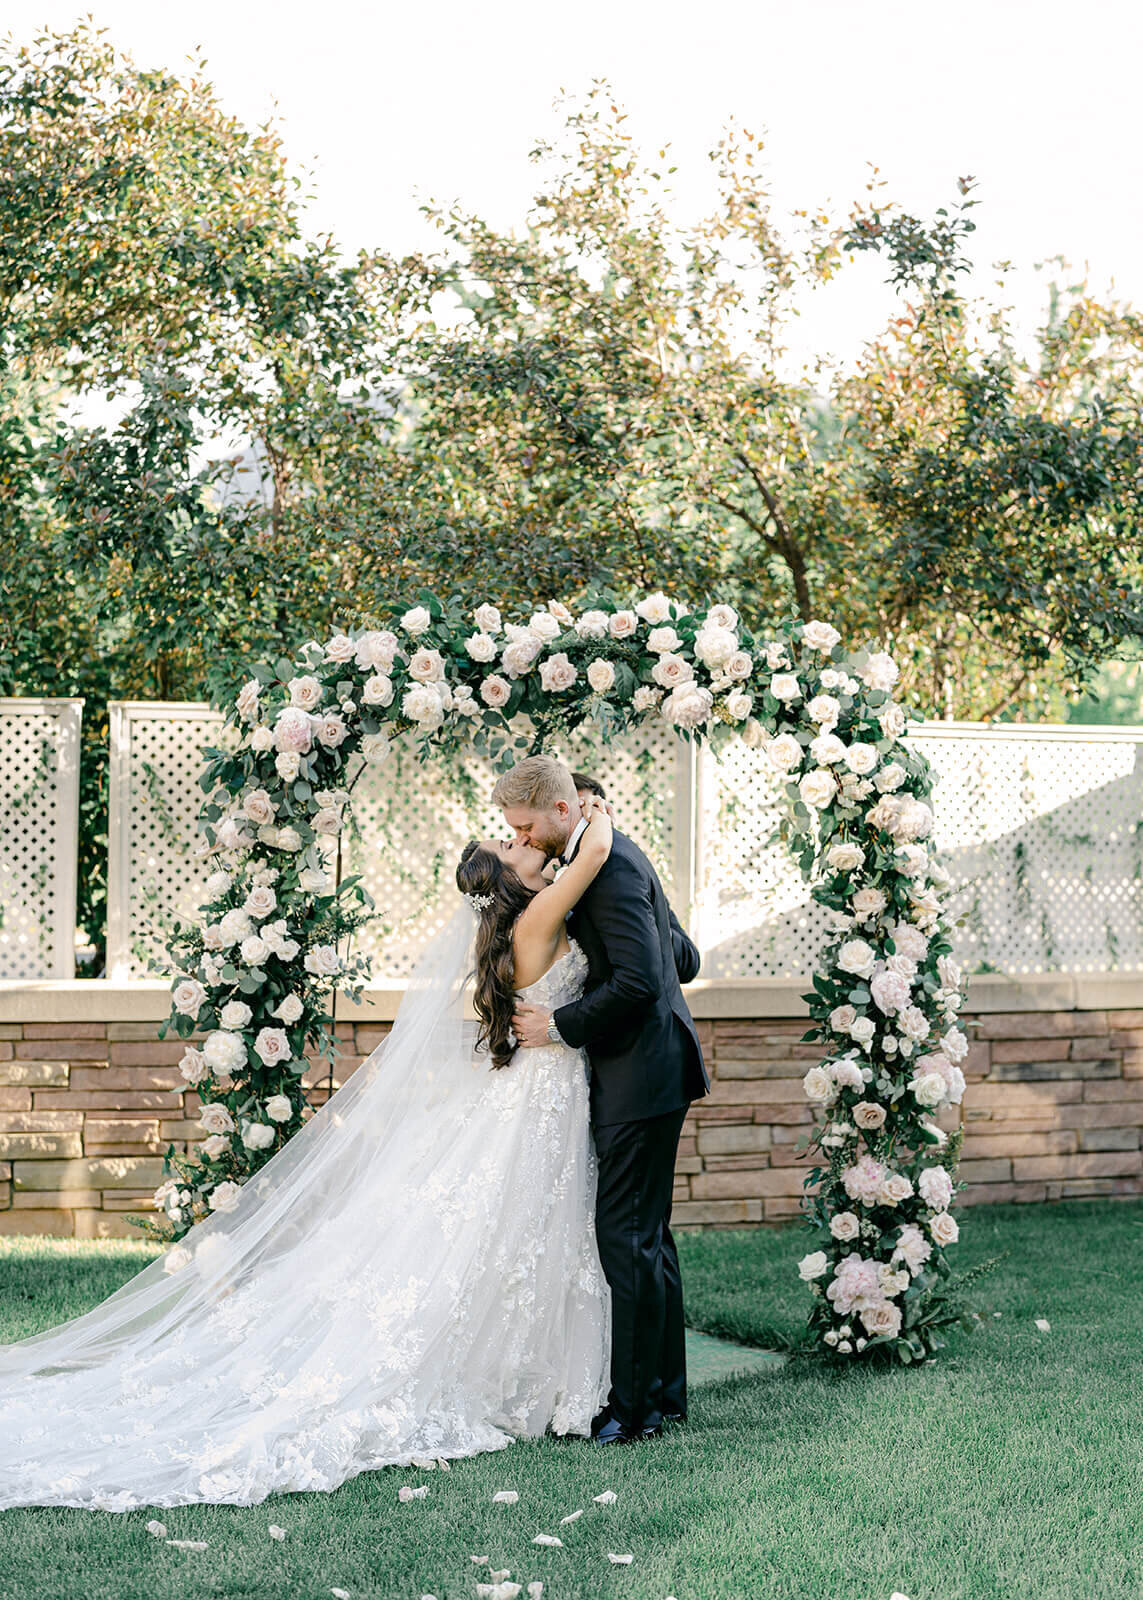 Bride and groom kissing under the custom floral arch at a Boulder Colorado wedding